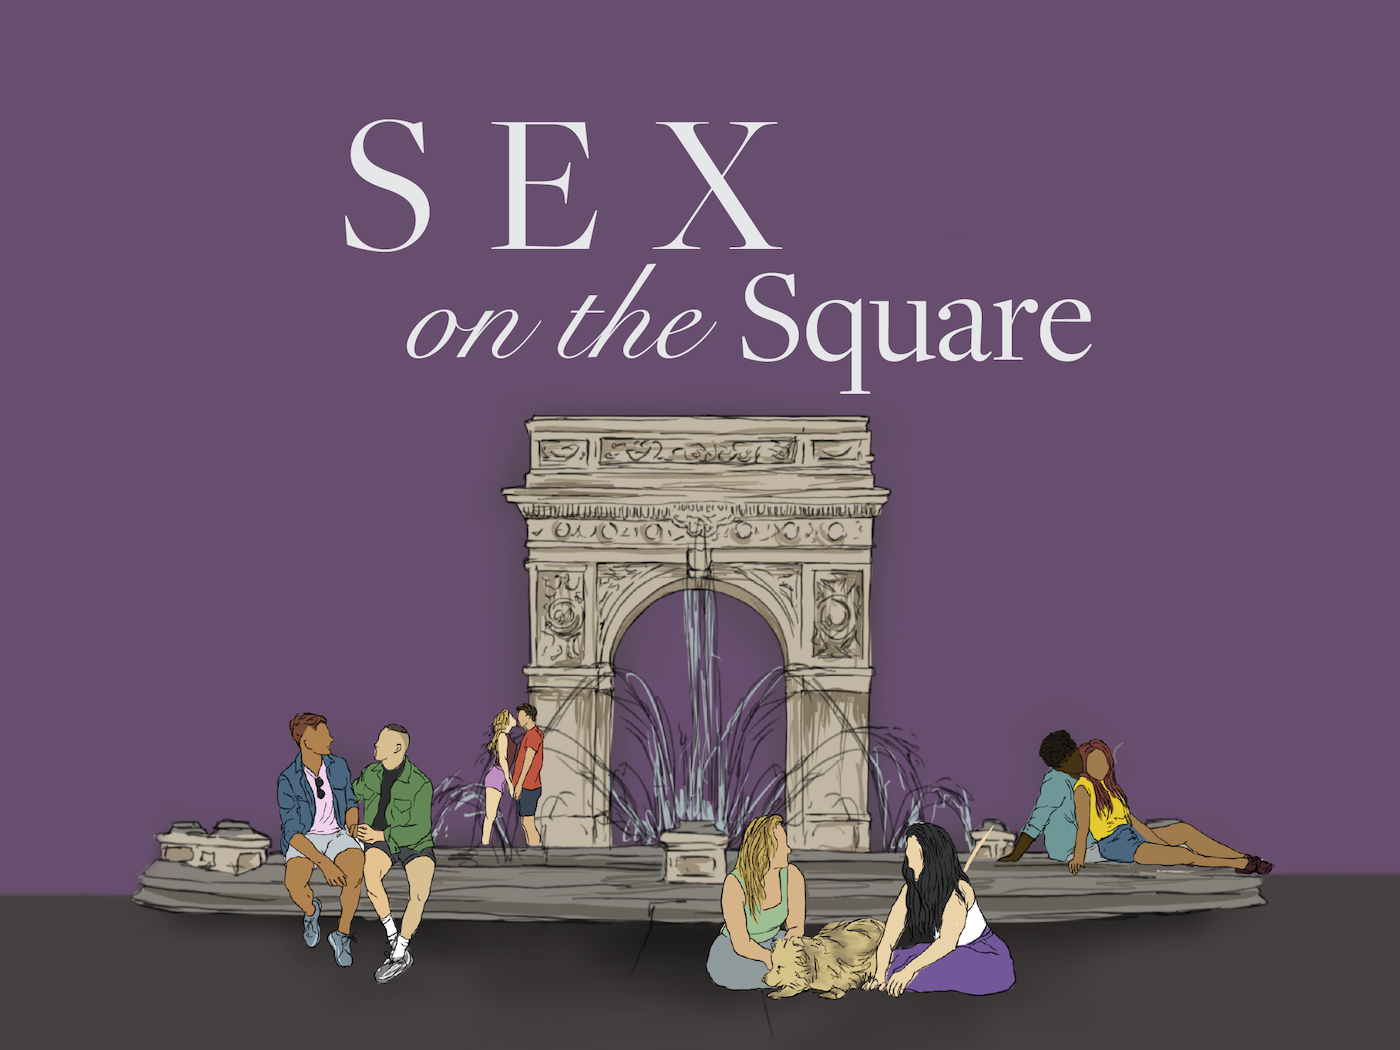 School Double Penetration - Sex on the Square: NYU-themed sex positions